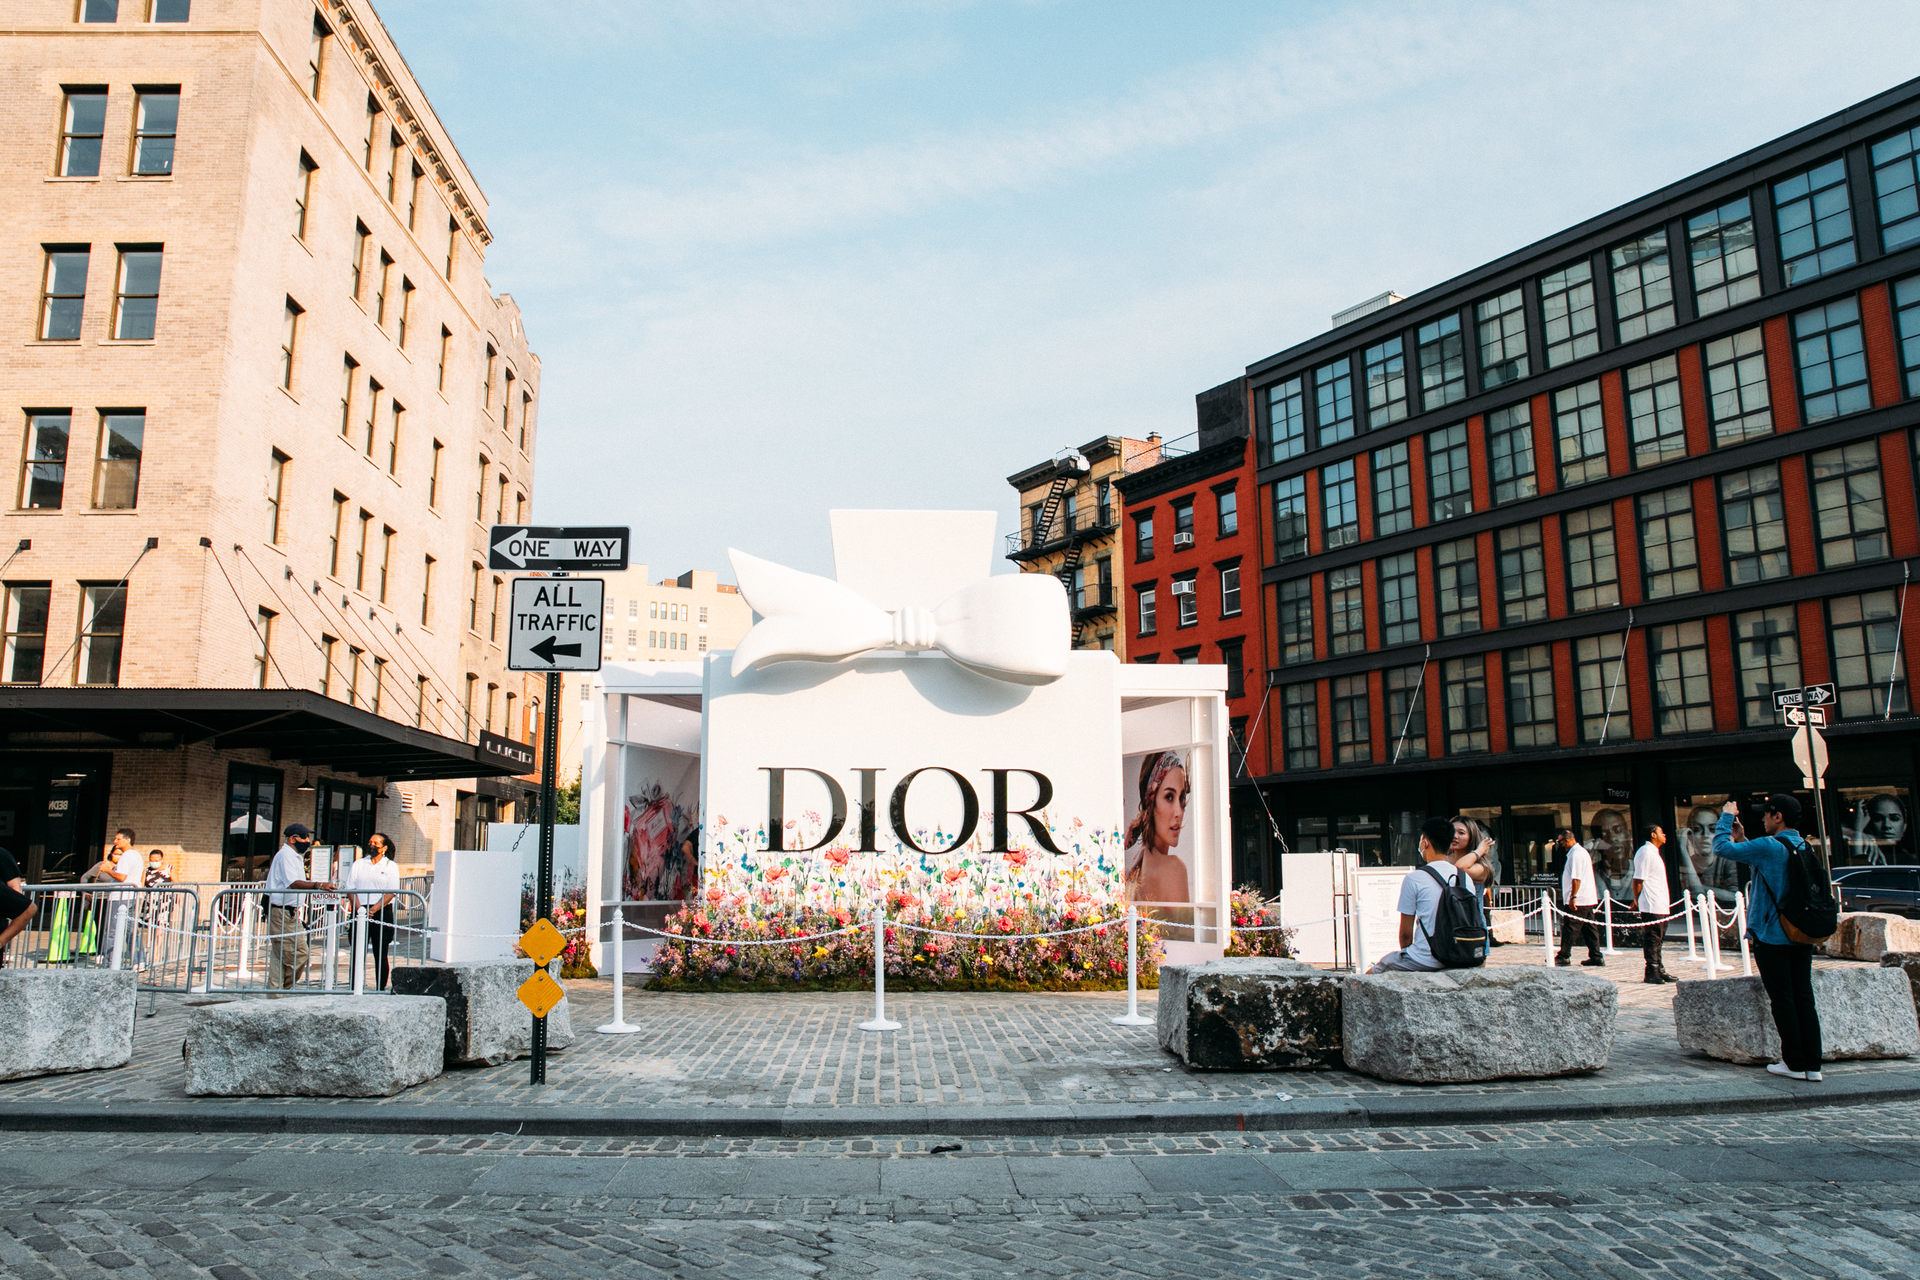 See Inside the Dior Beauty Pop-Up That Went Viral During NYFW | BizBash